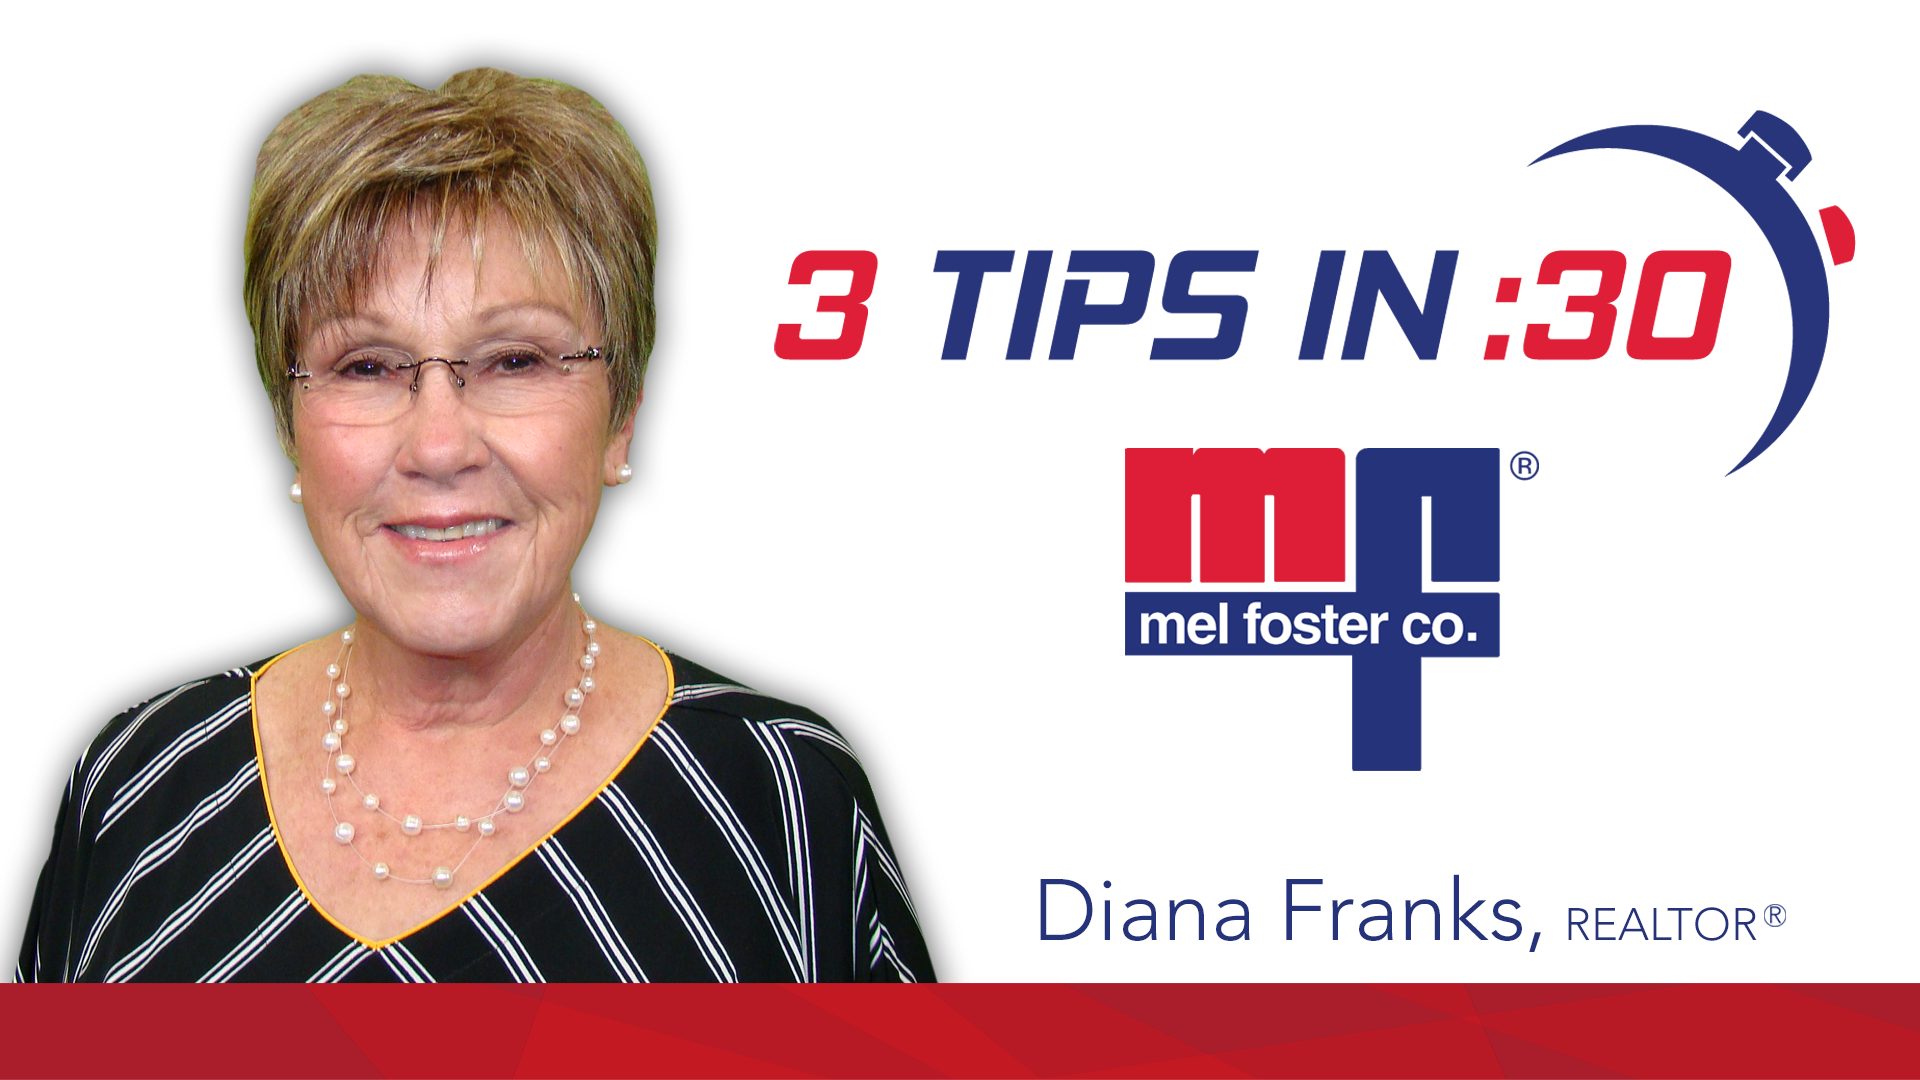 Diana Franks, REALTOR® with Mel Foster Co. gives Tips in 30